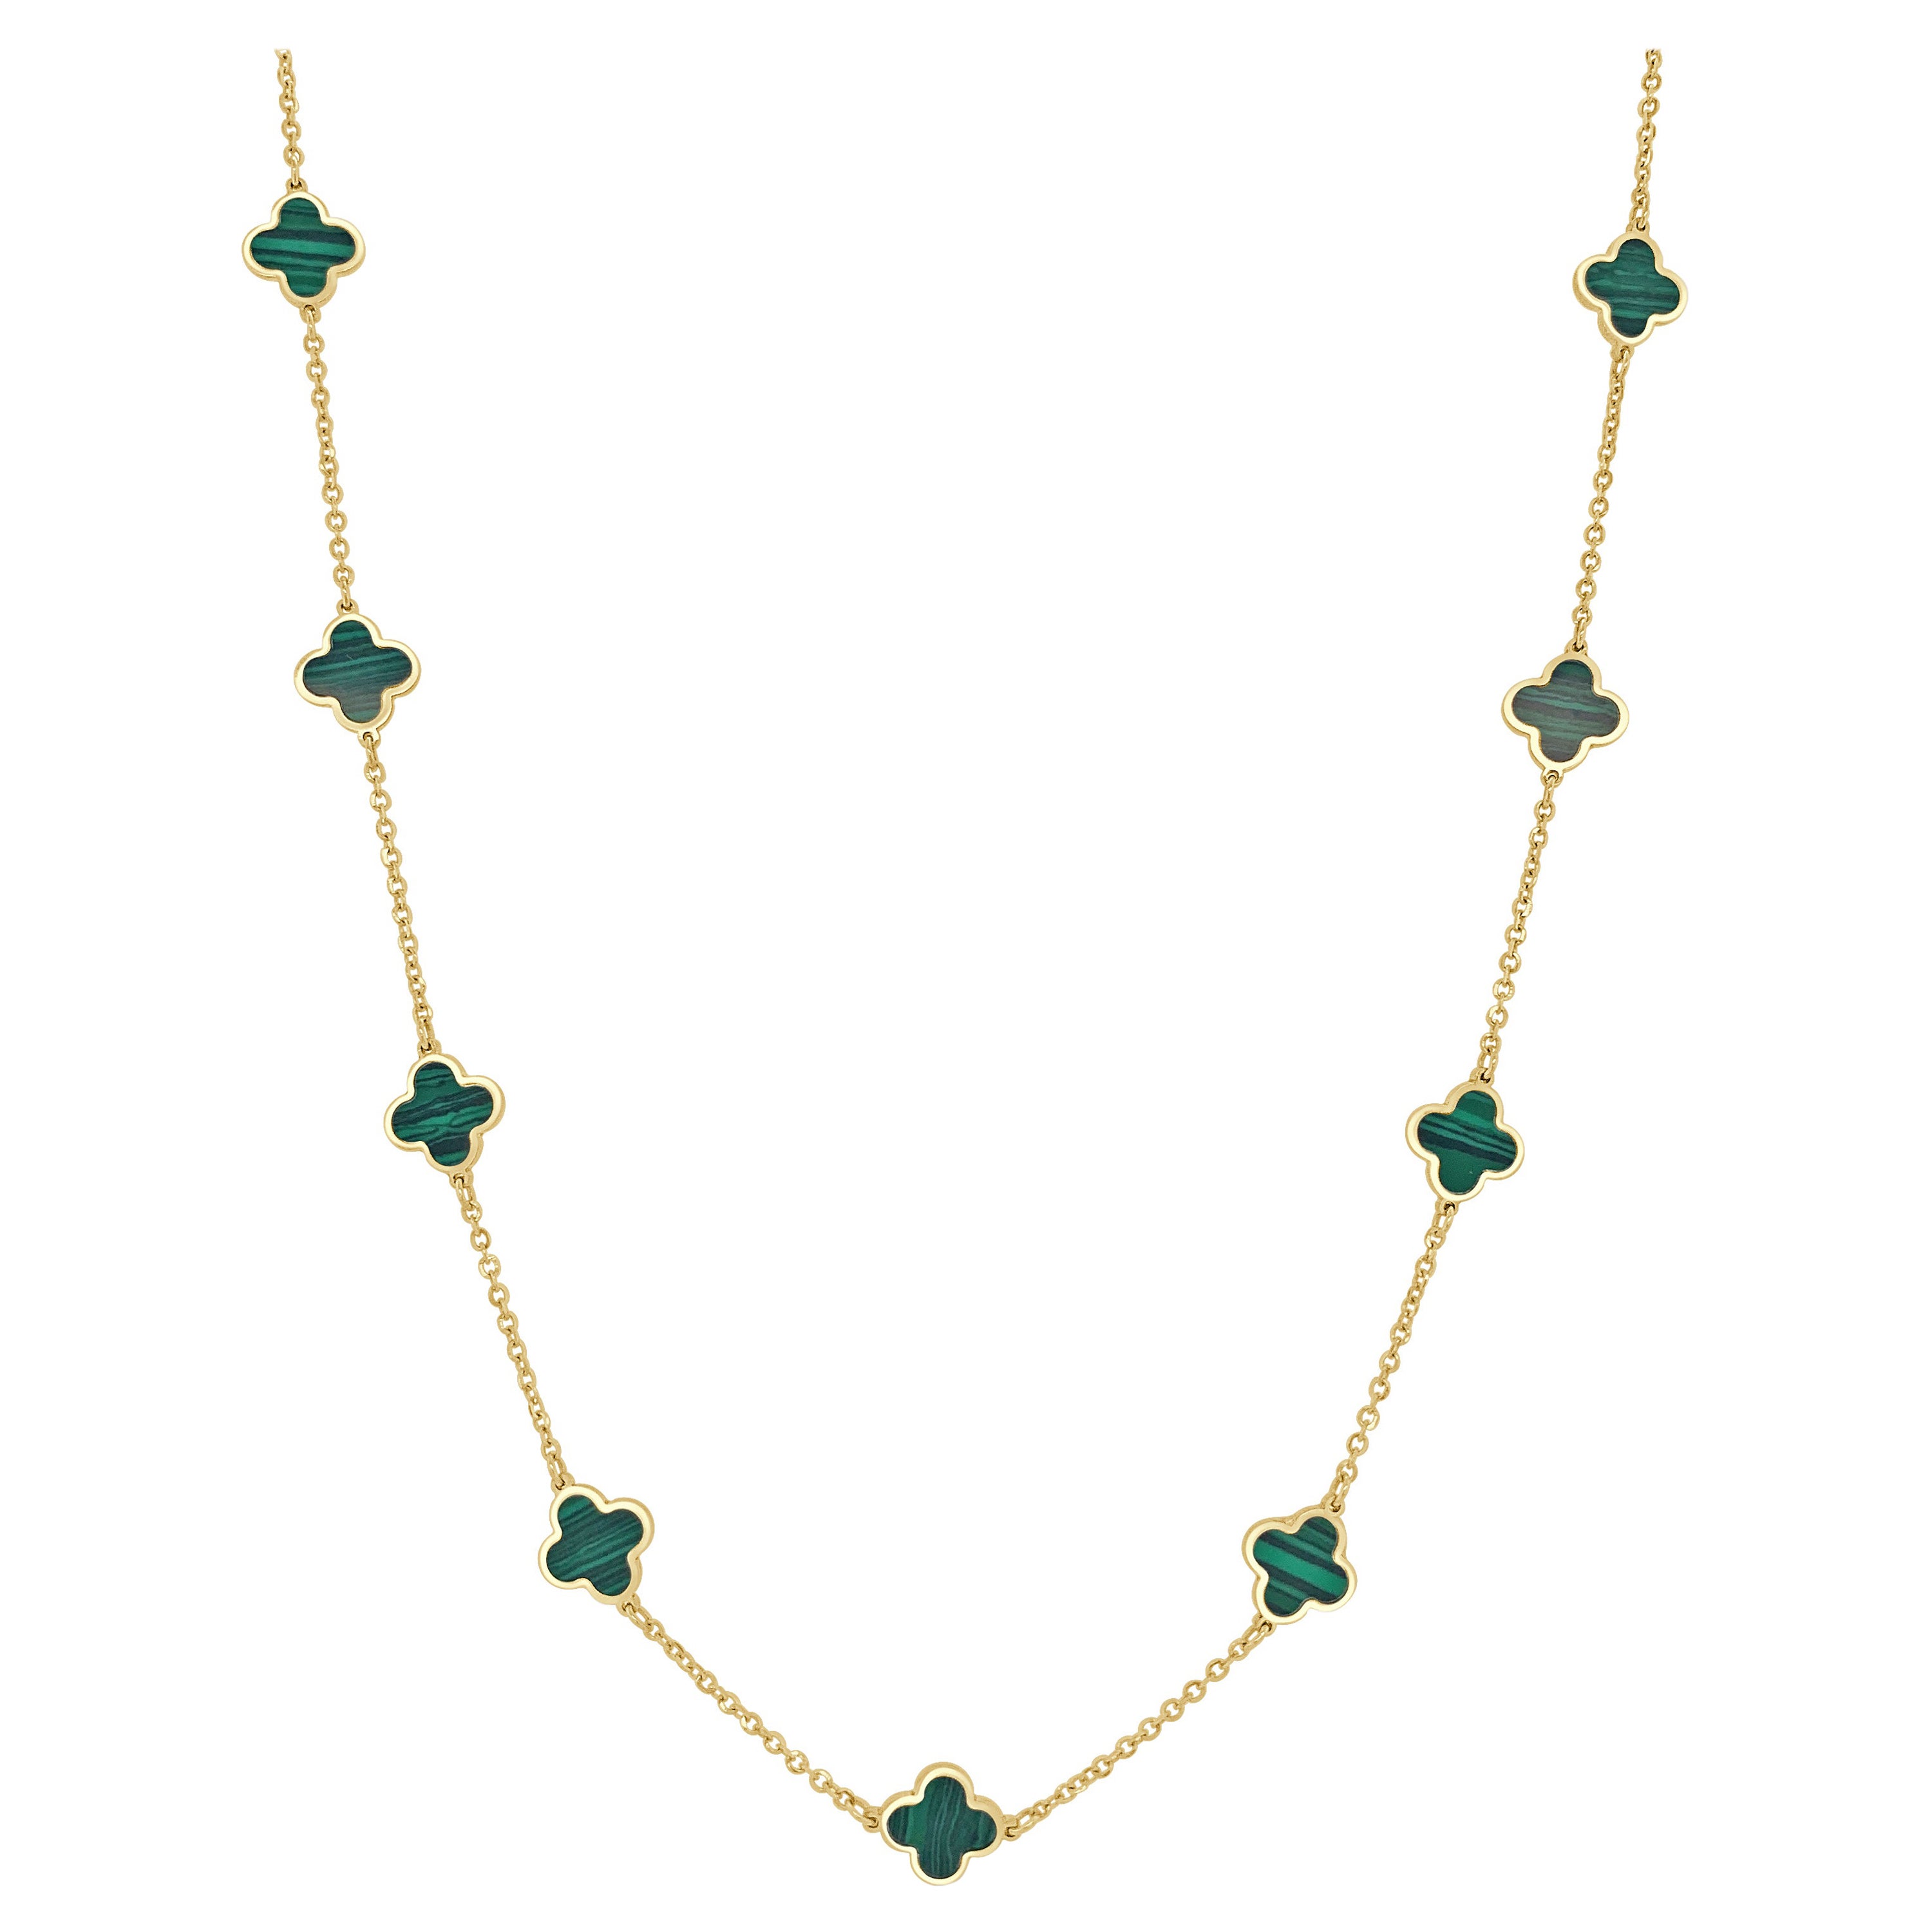 14k Yellow Gold & Malachite Inlay Station Clover Necklace